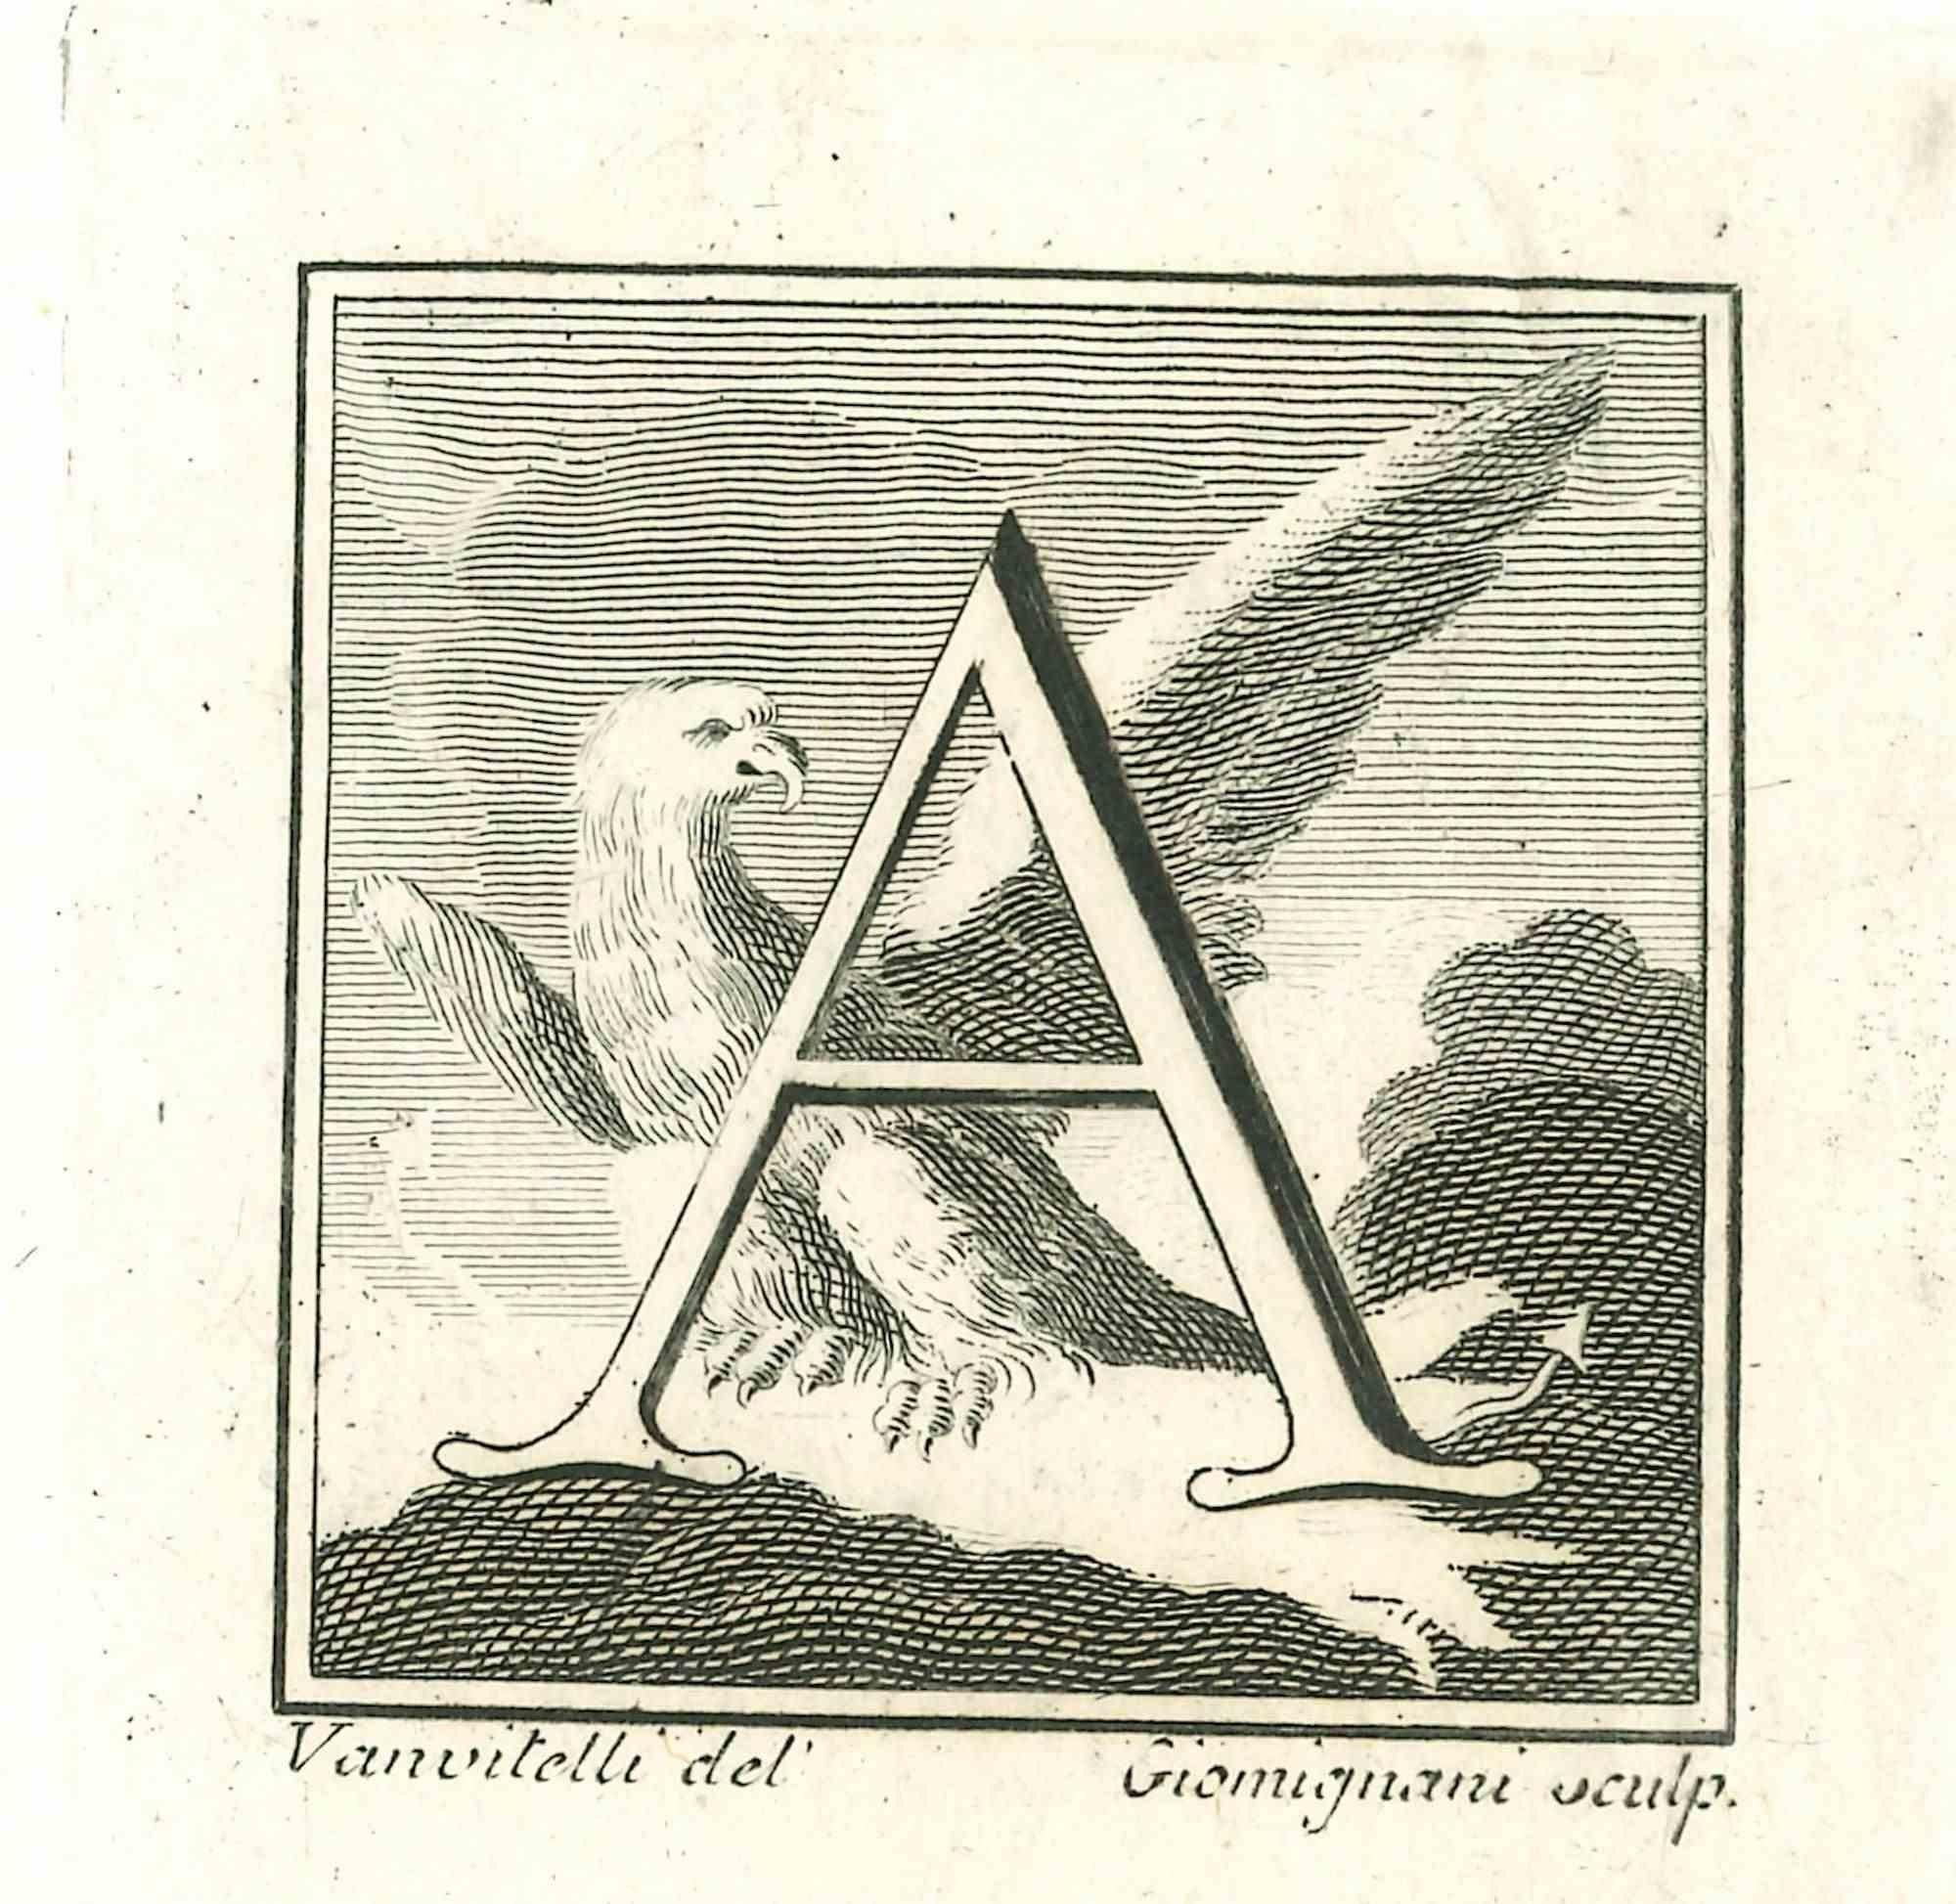 Unknown Figurative Print - Capital Letter A - the Antiquities of Herculaneum Exposed-Etching - 18th Century